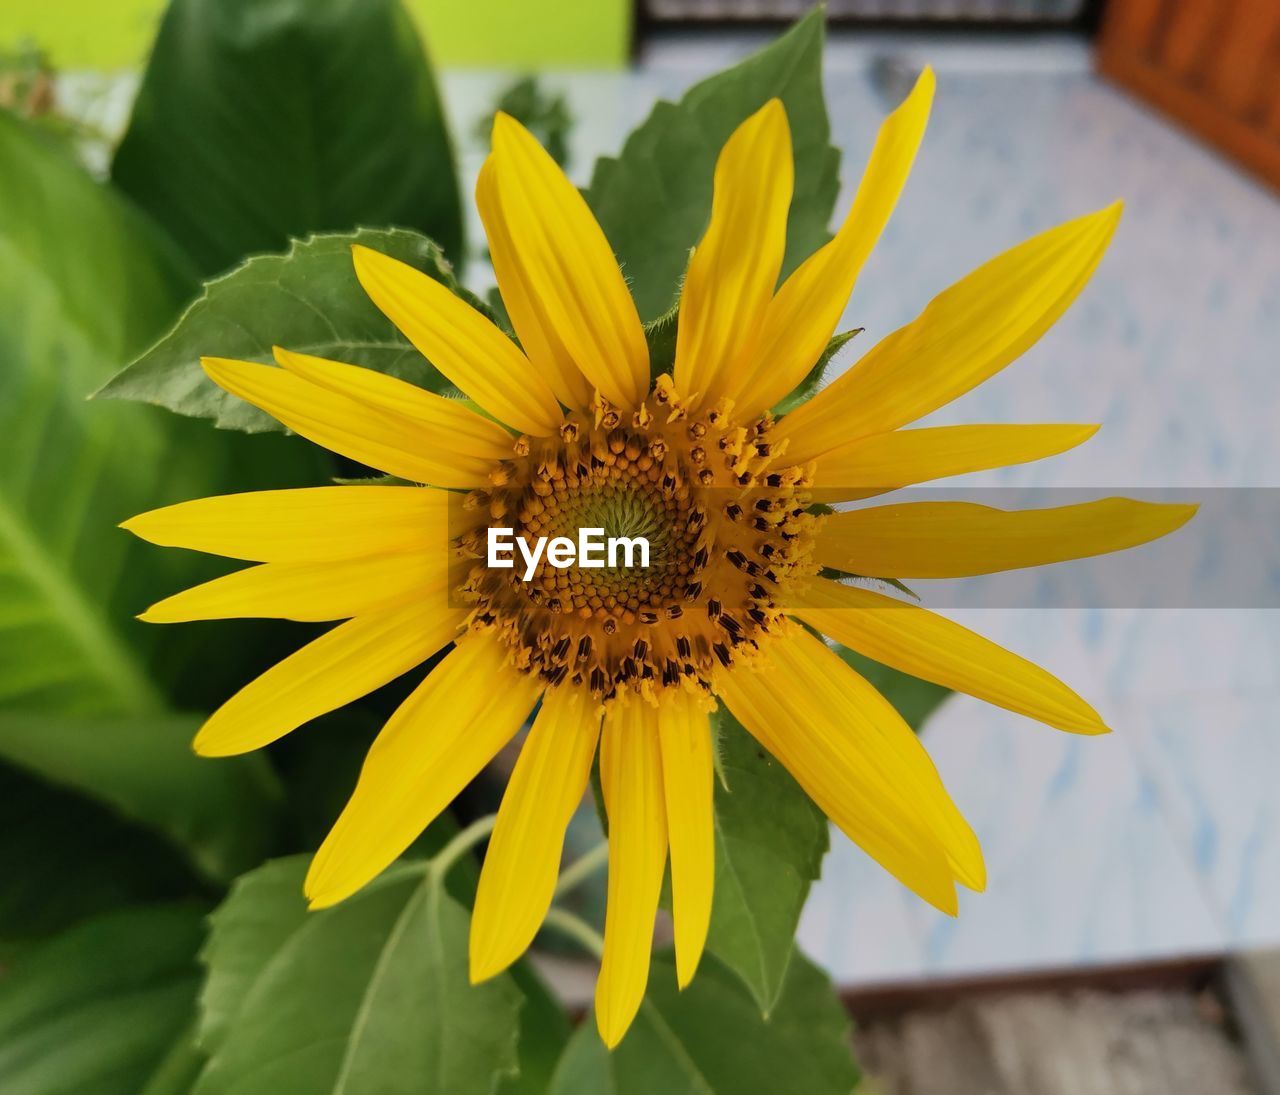 flower, flowering plant, plant, freshness, yellow, flower head, beauty in nature, sunflower, growth, petal, inflorescence, fragility, close-up, nature, pollen, no people, focus on foreground, leaf, macro photography, plant part, outdoors, day, blossom, botany, springtime, green, summer, vibrant color